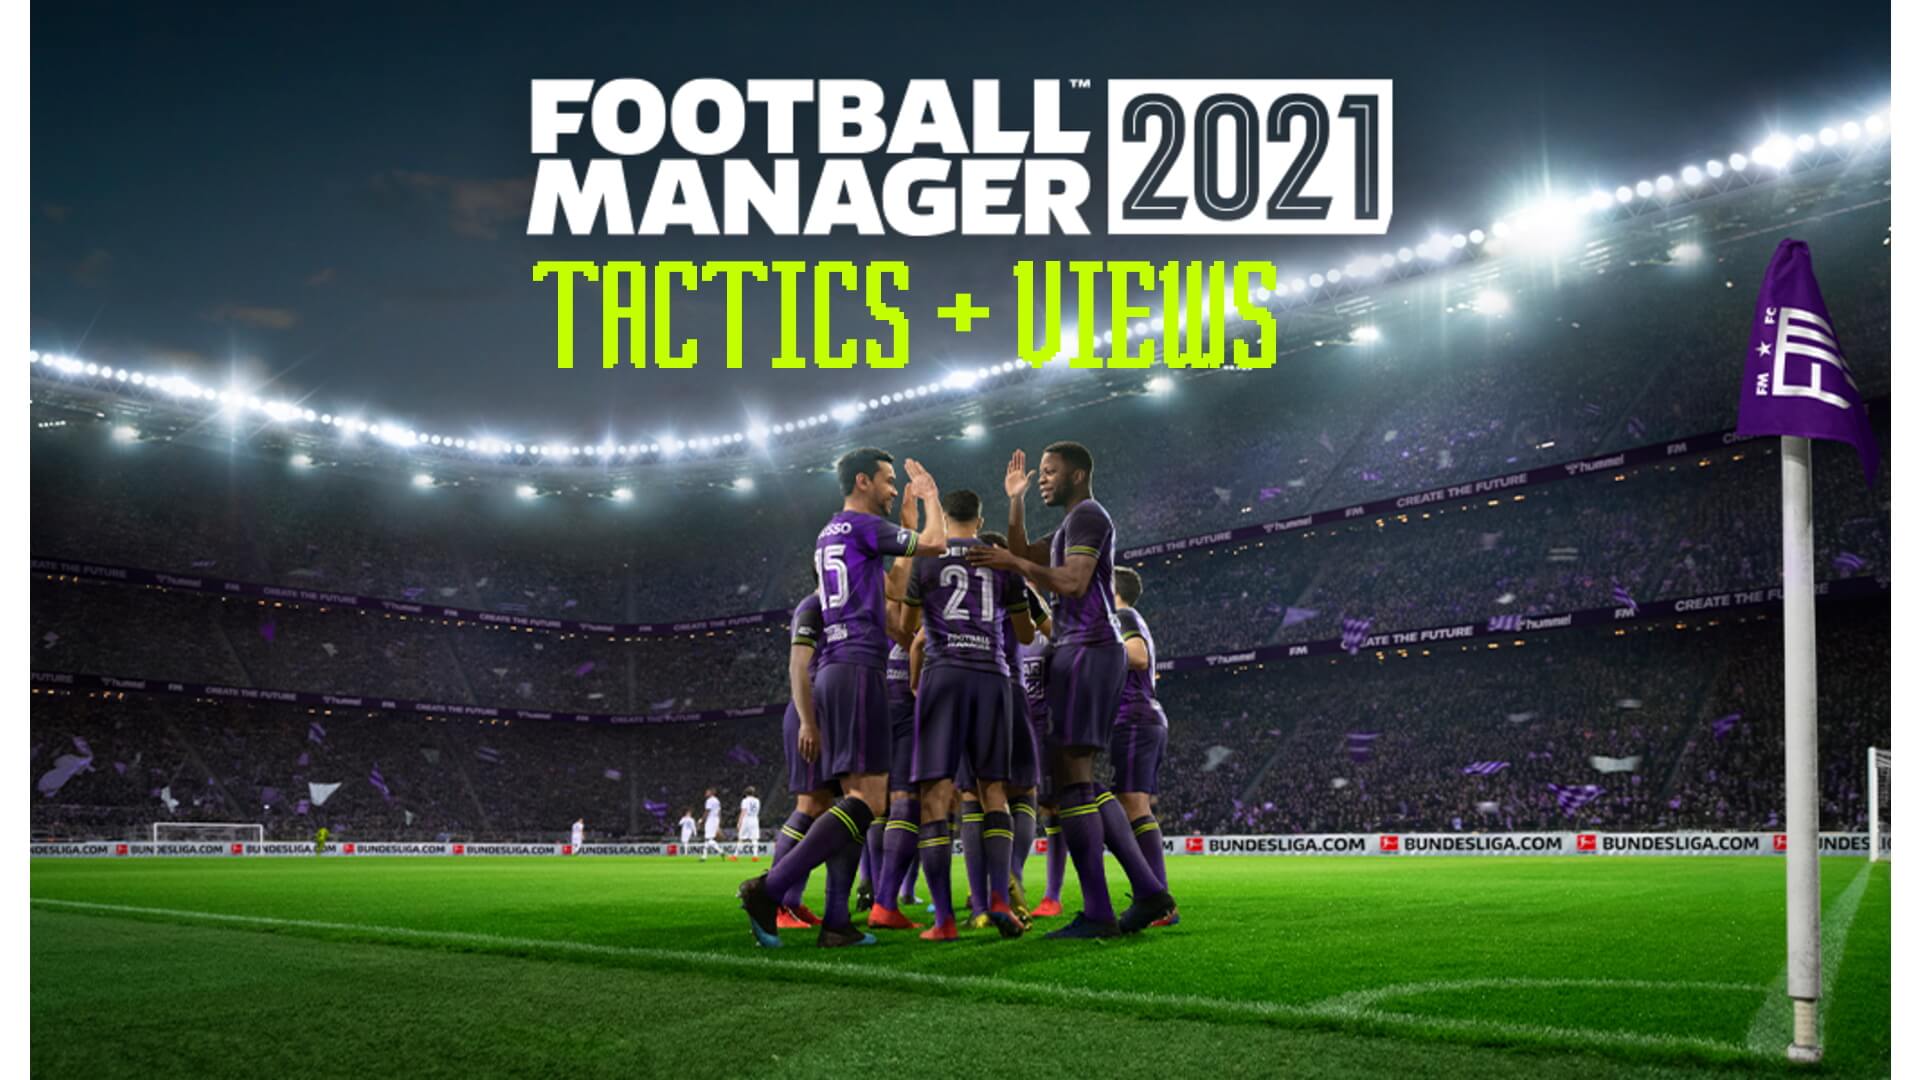 A detailed guide and tutorial on how to play Football Manager